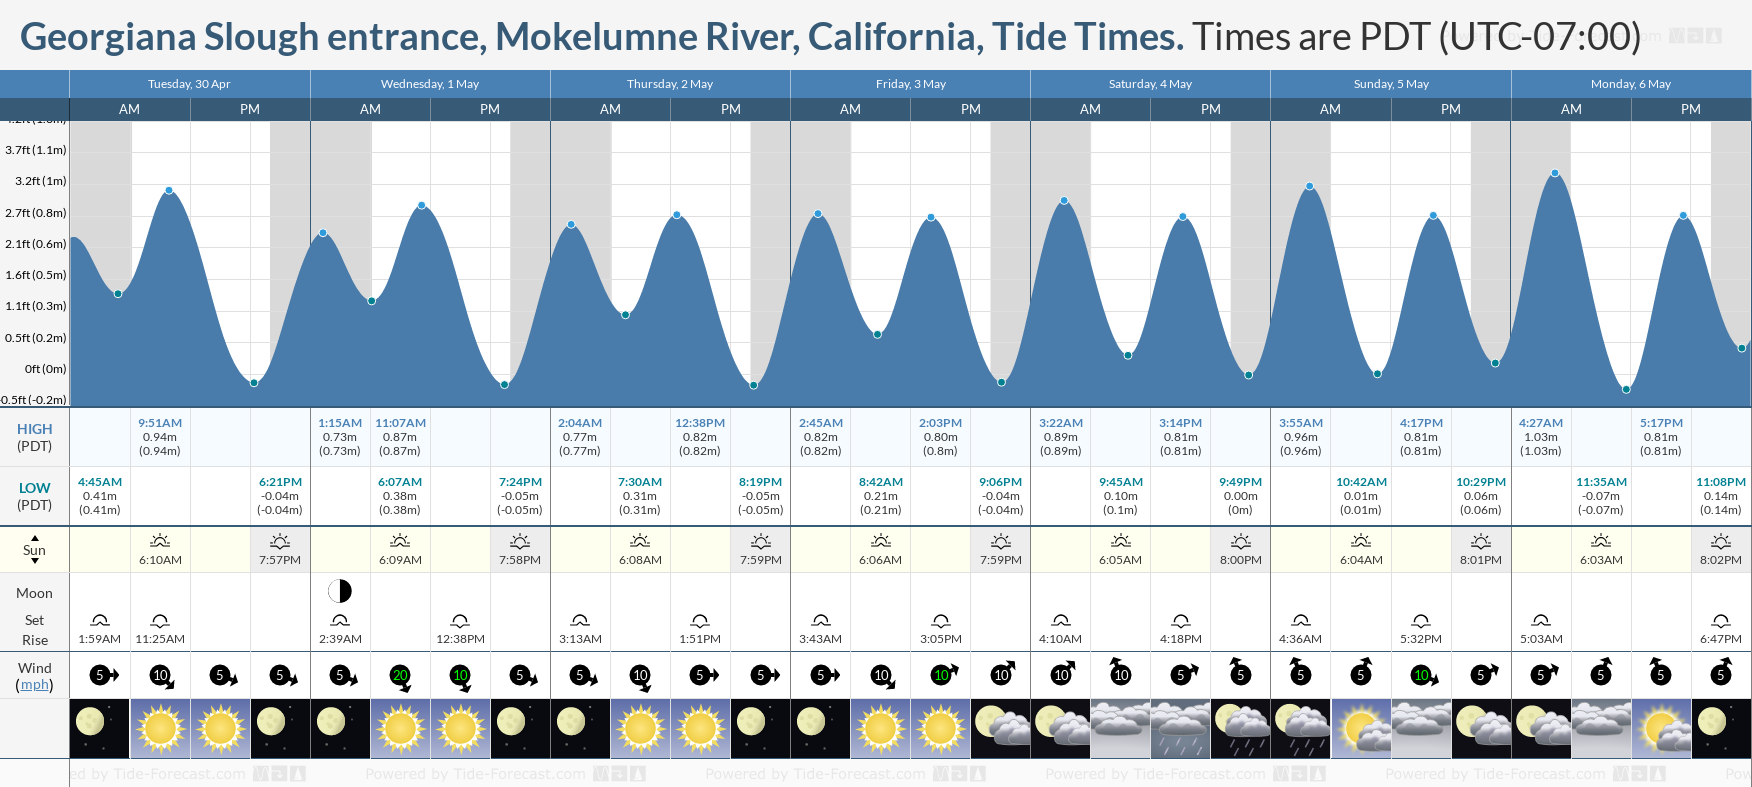 Georgiana Slough entrance, Mokelumne River, California Tide Chart including high and low tide tide times for the next 7 days